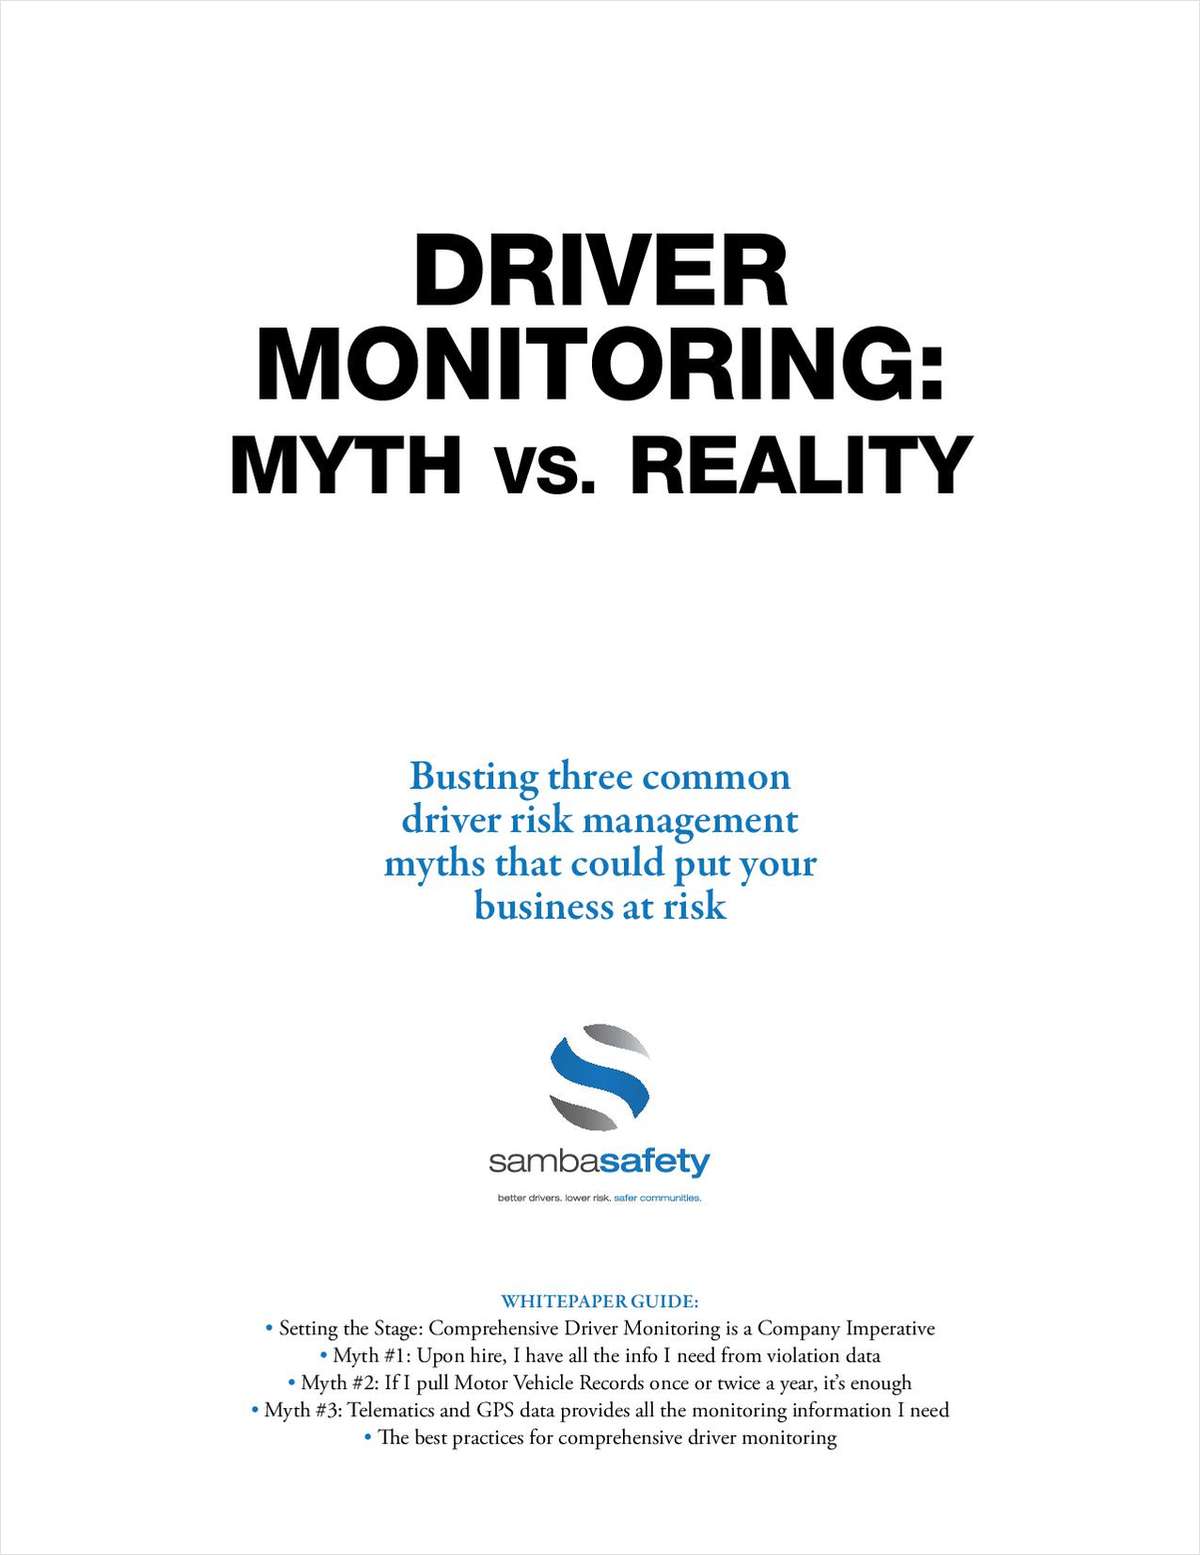 The Truth About Driver Monitoring